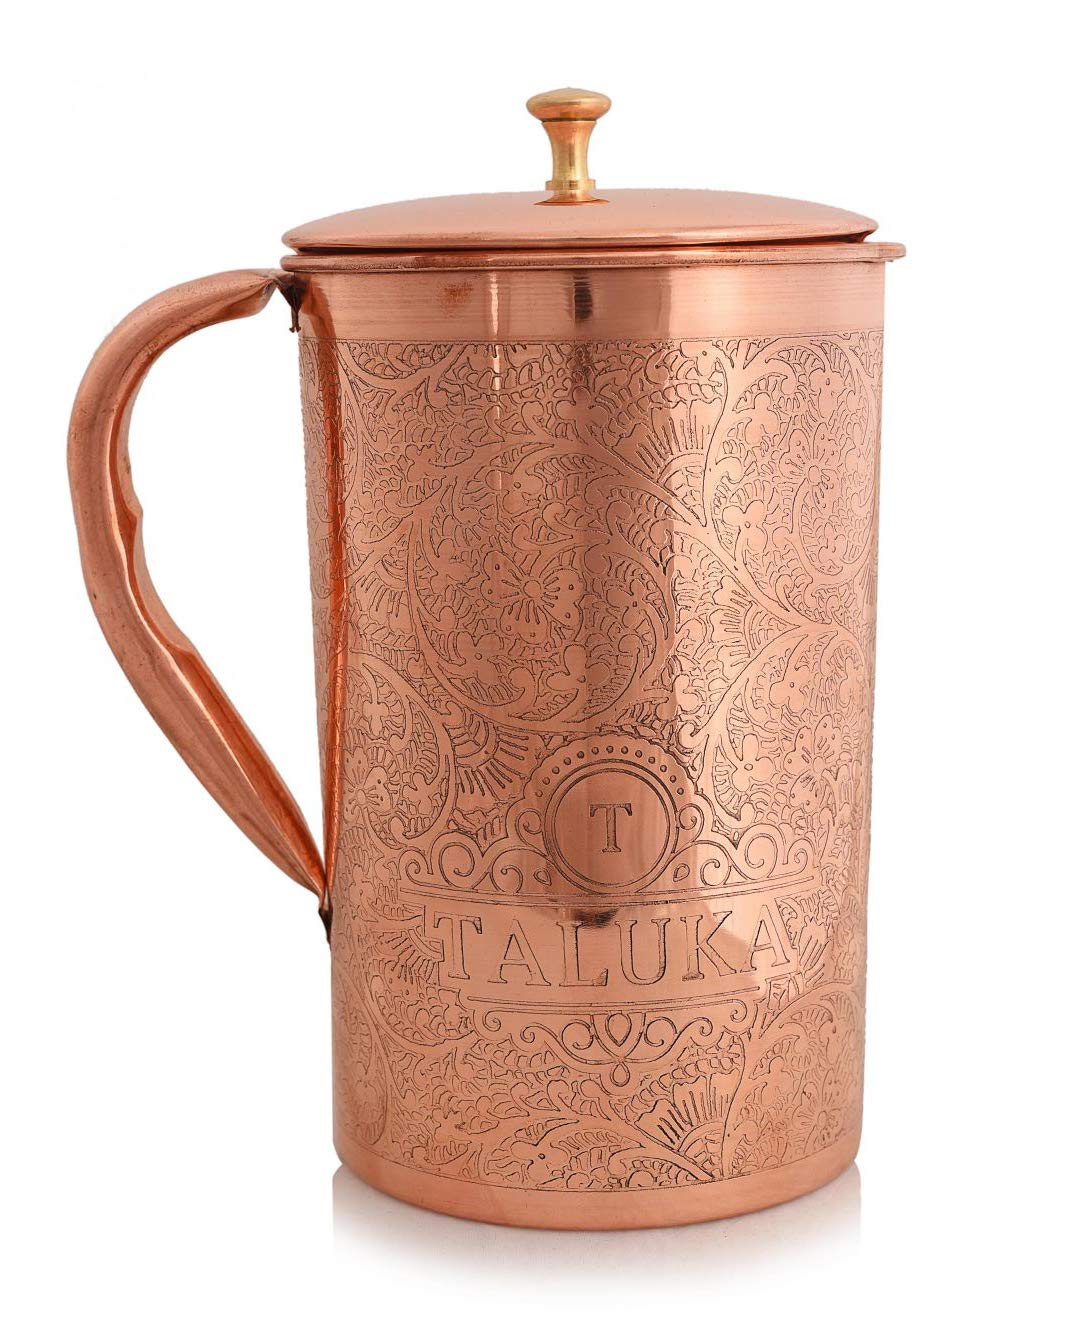 Taluka Pure Copper Embossed Water Jug Pitcher with Brass Knob 2000 ML Water Storage Hotel Home Restaurant (Size: Height 9 Inch x Dia 4.5 Inch)